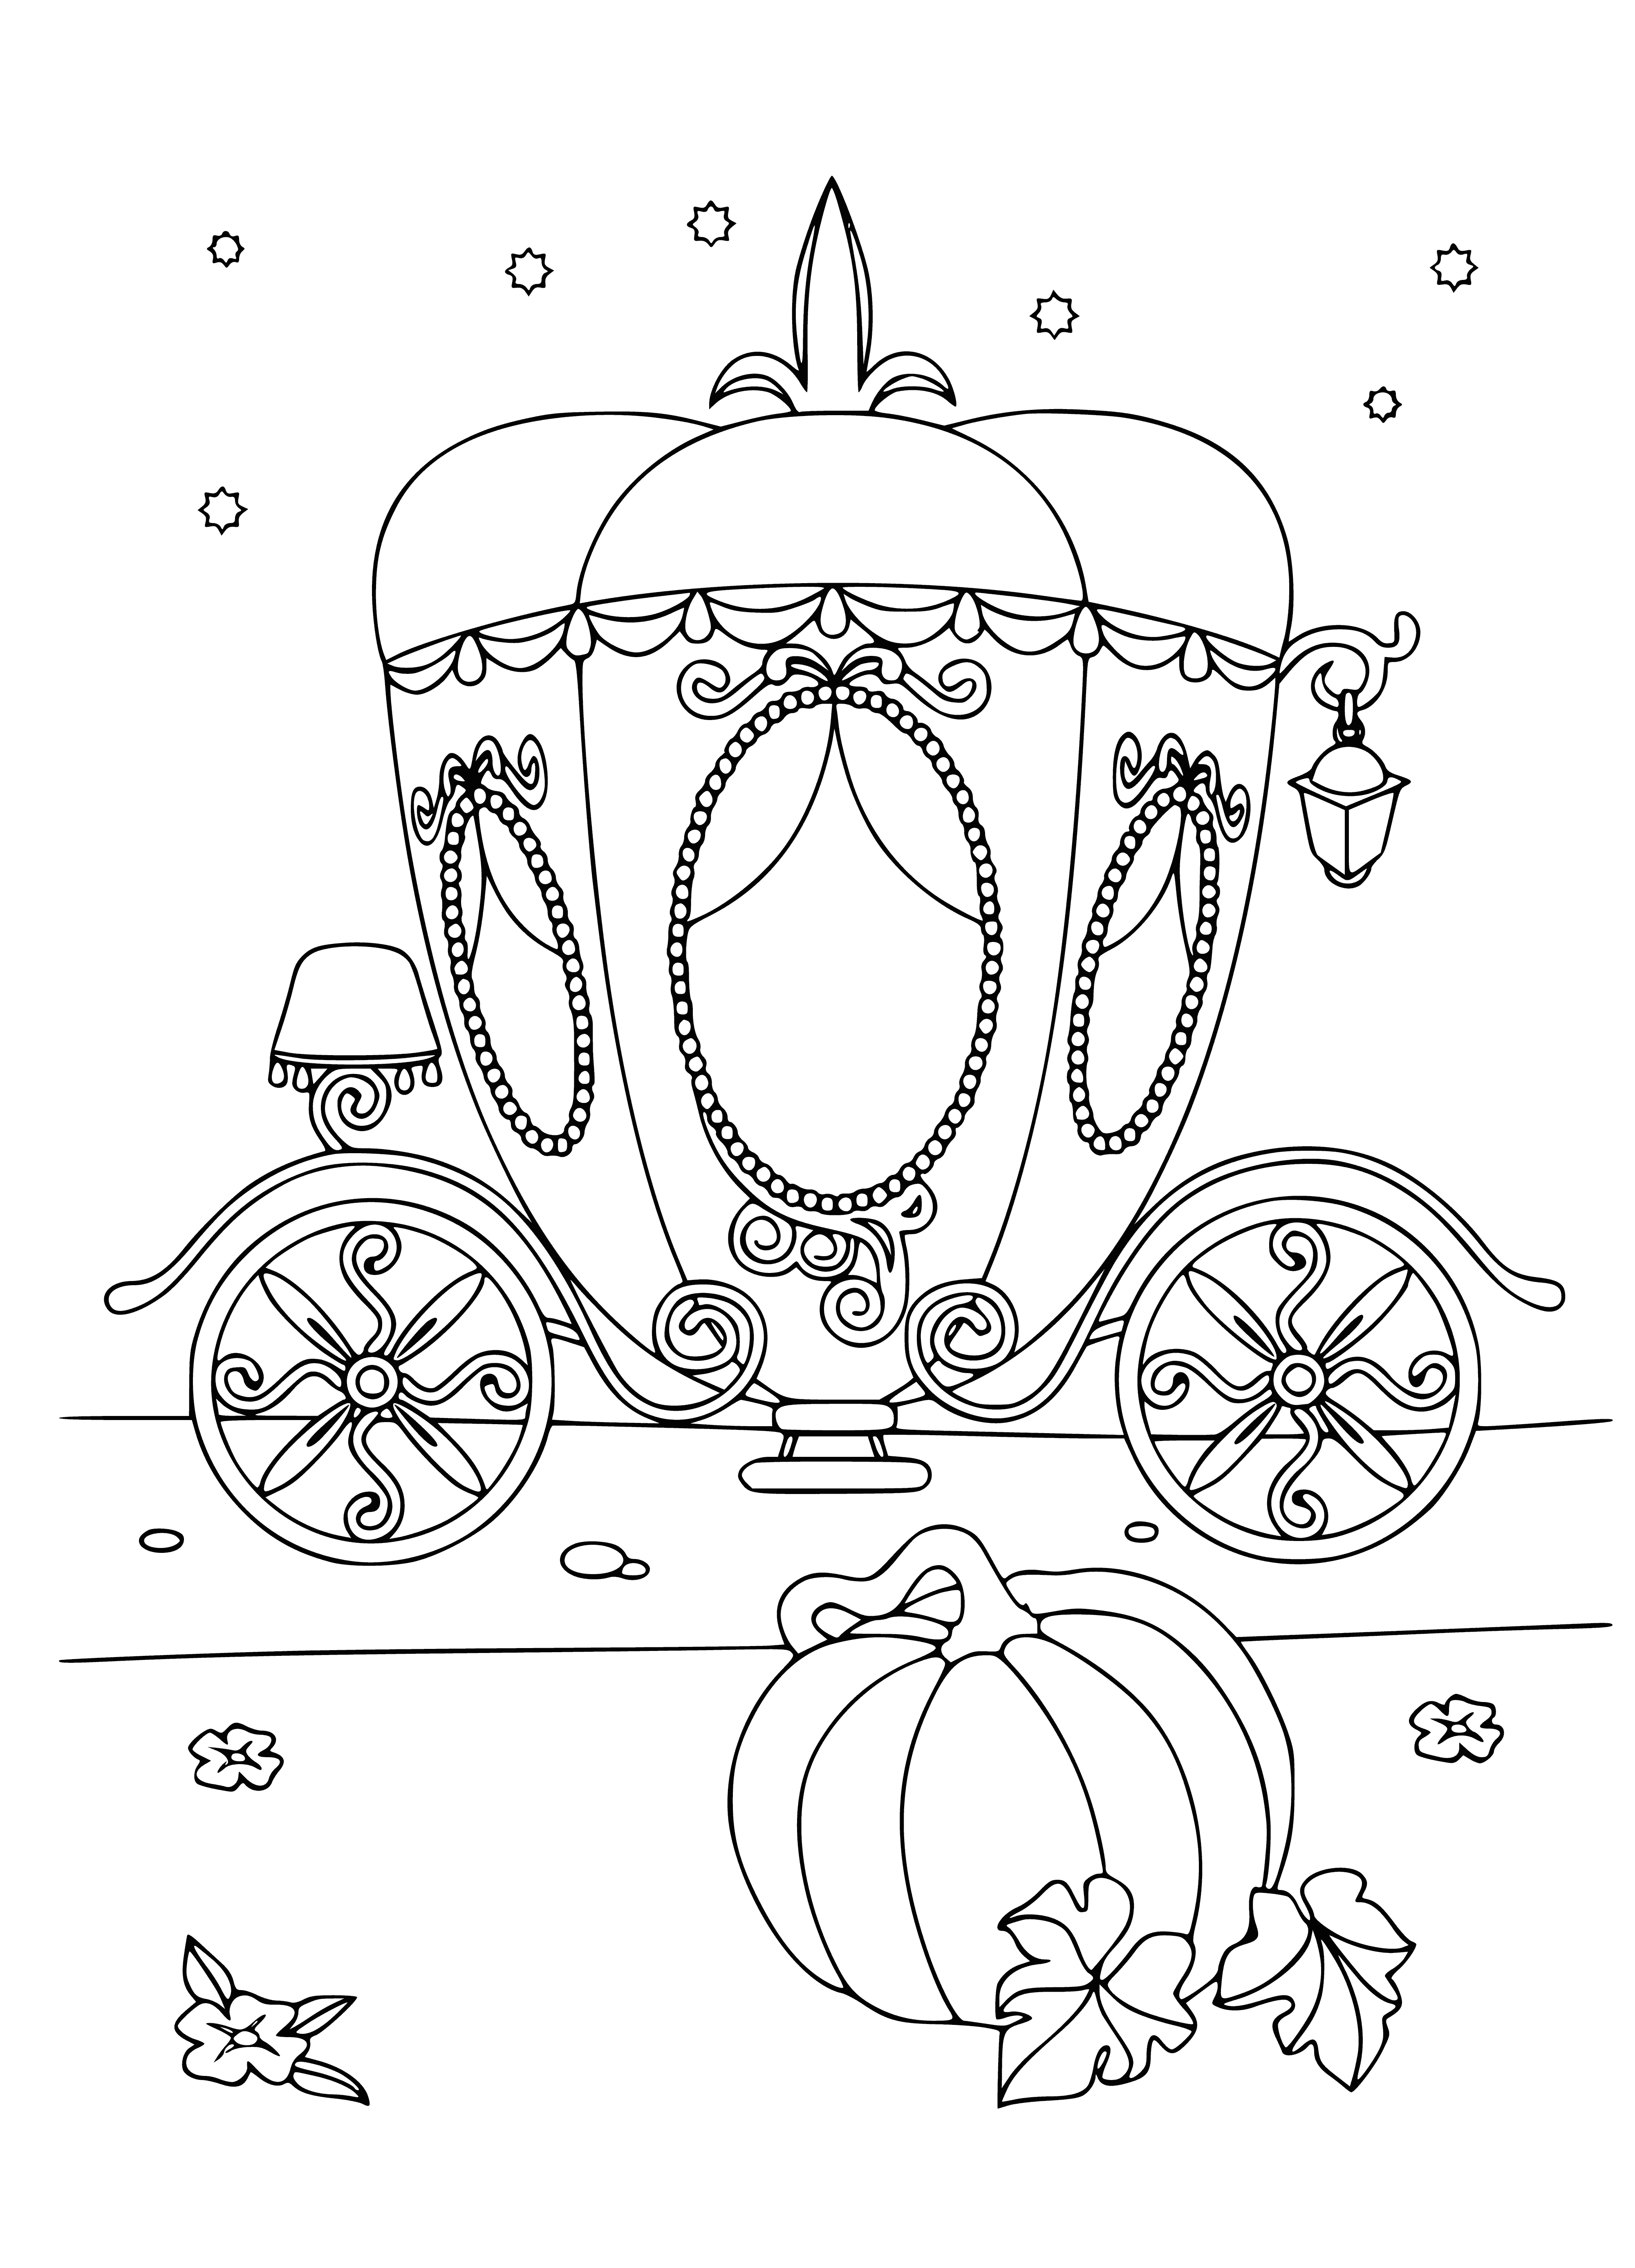 coloring page: Princess in pumpkin carriage being pulled by four white horses, wearing white dress and crown. #fairytale